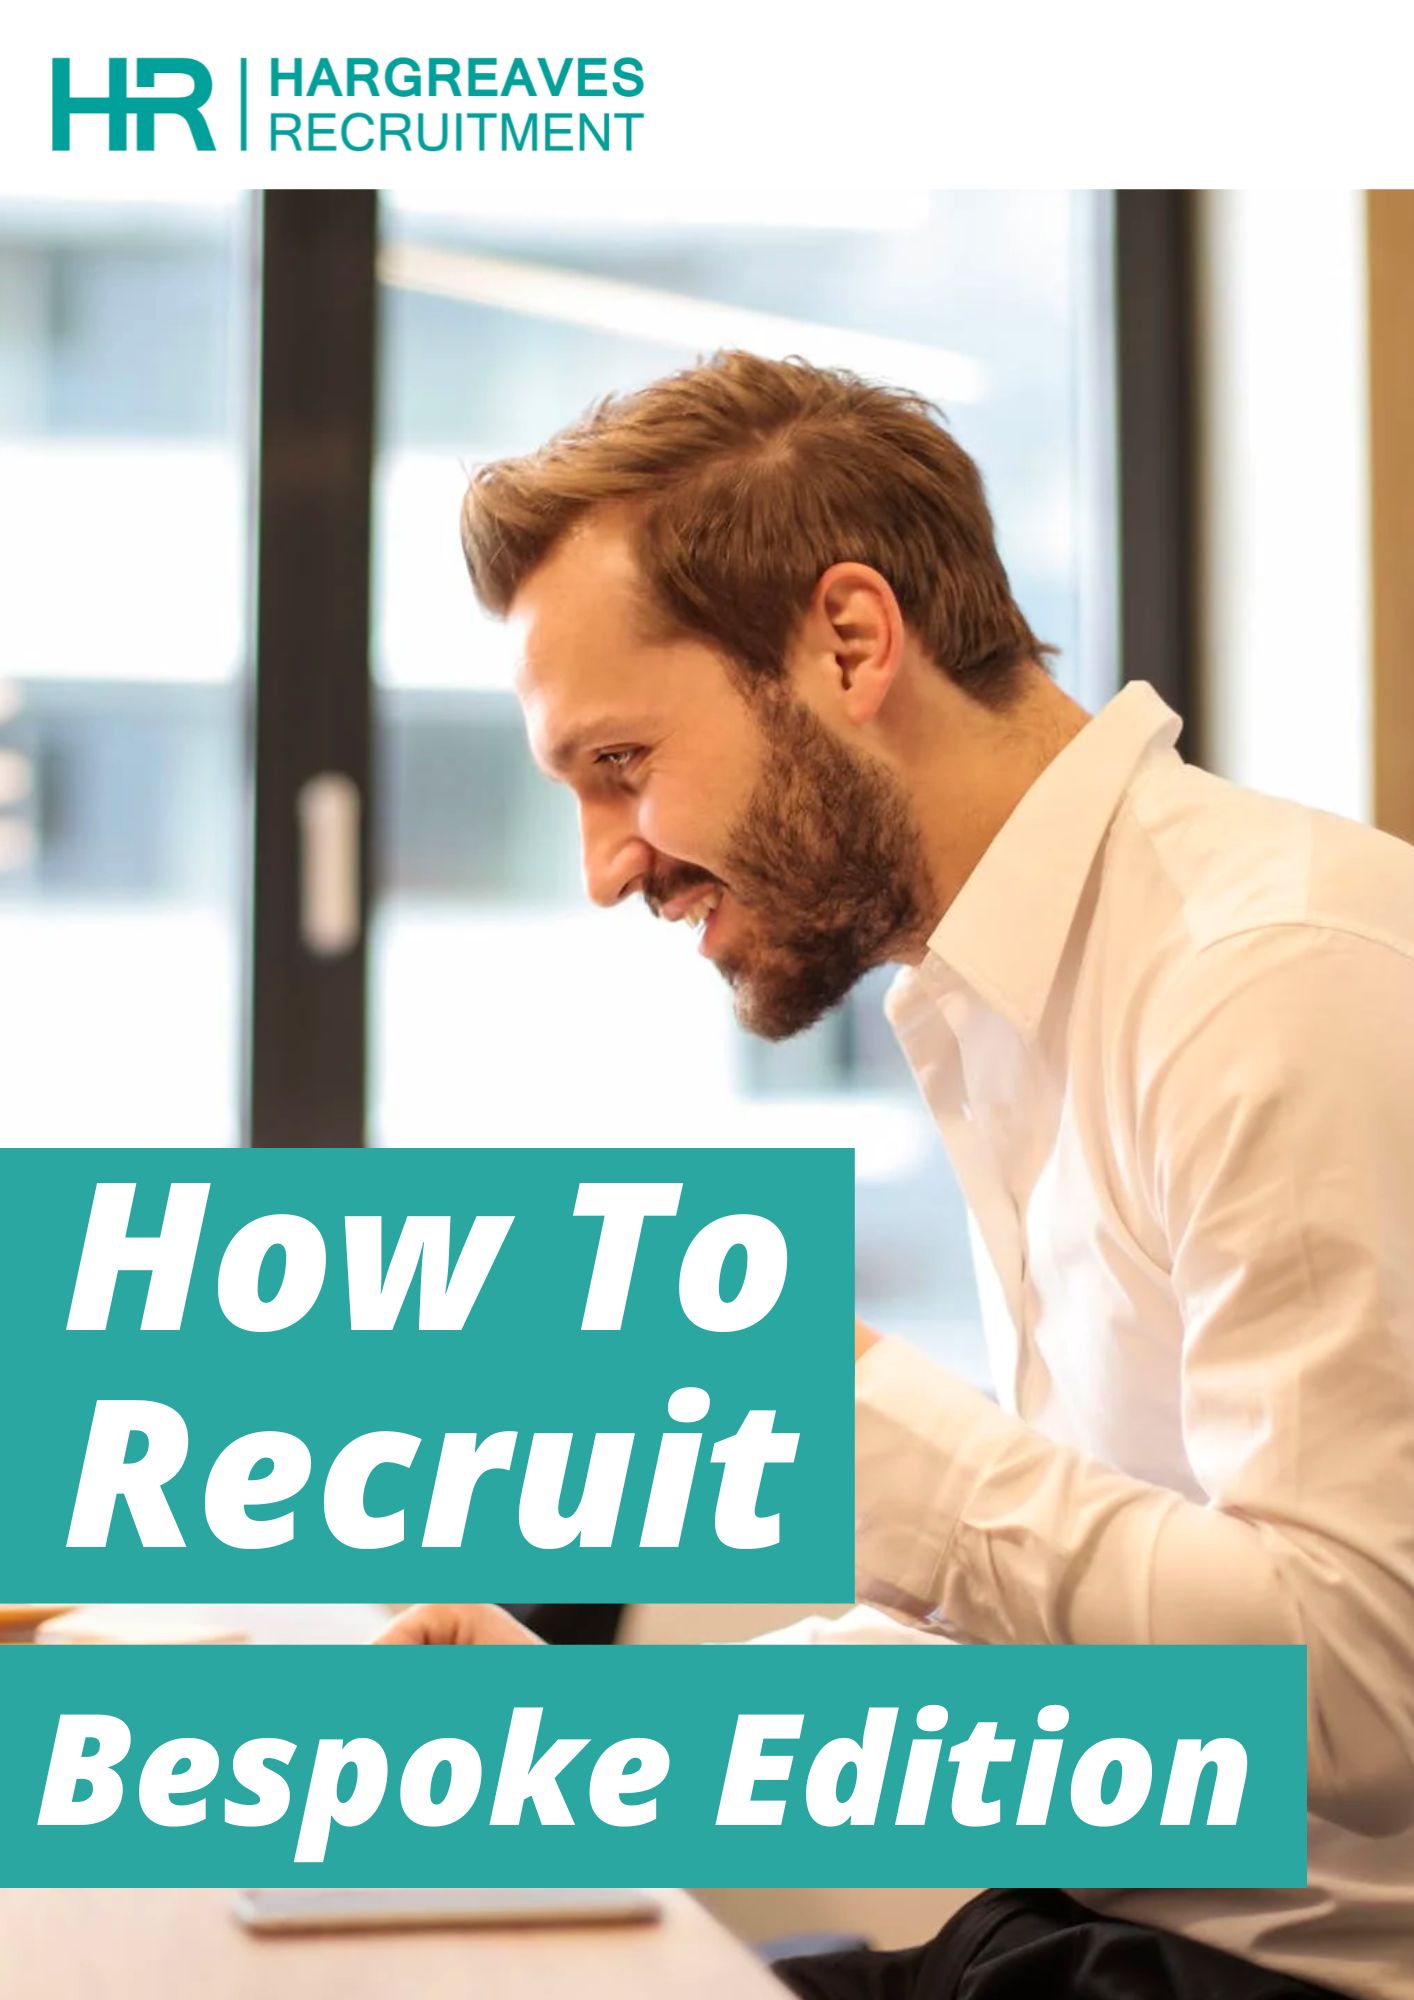 How To Recruit: Bespoke Edition